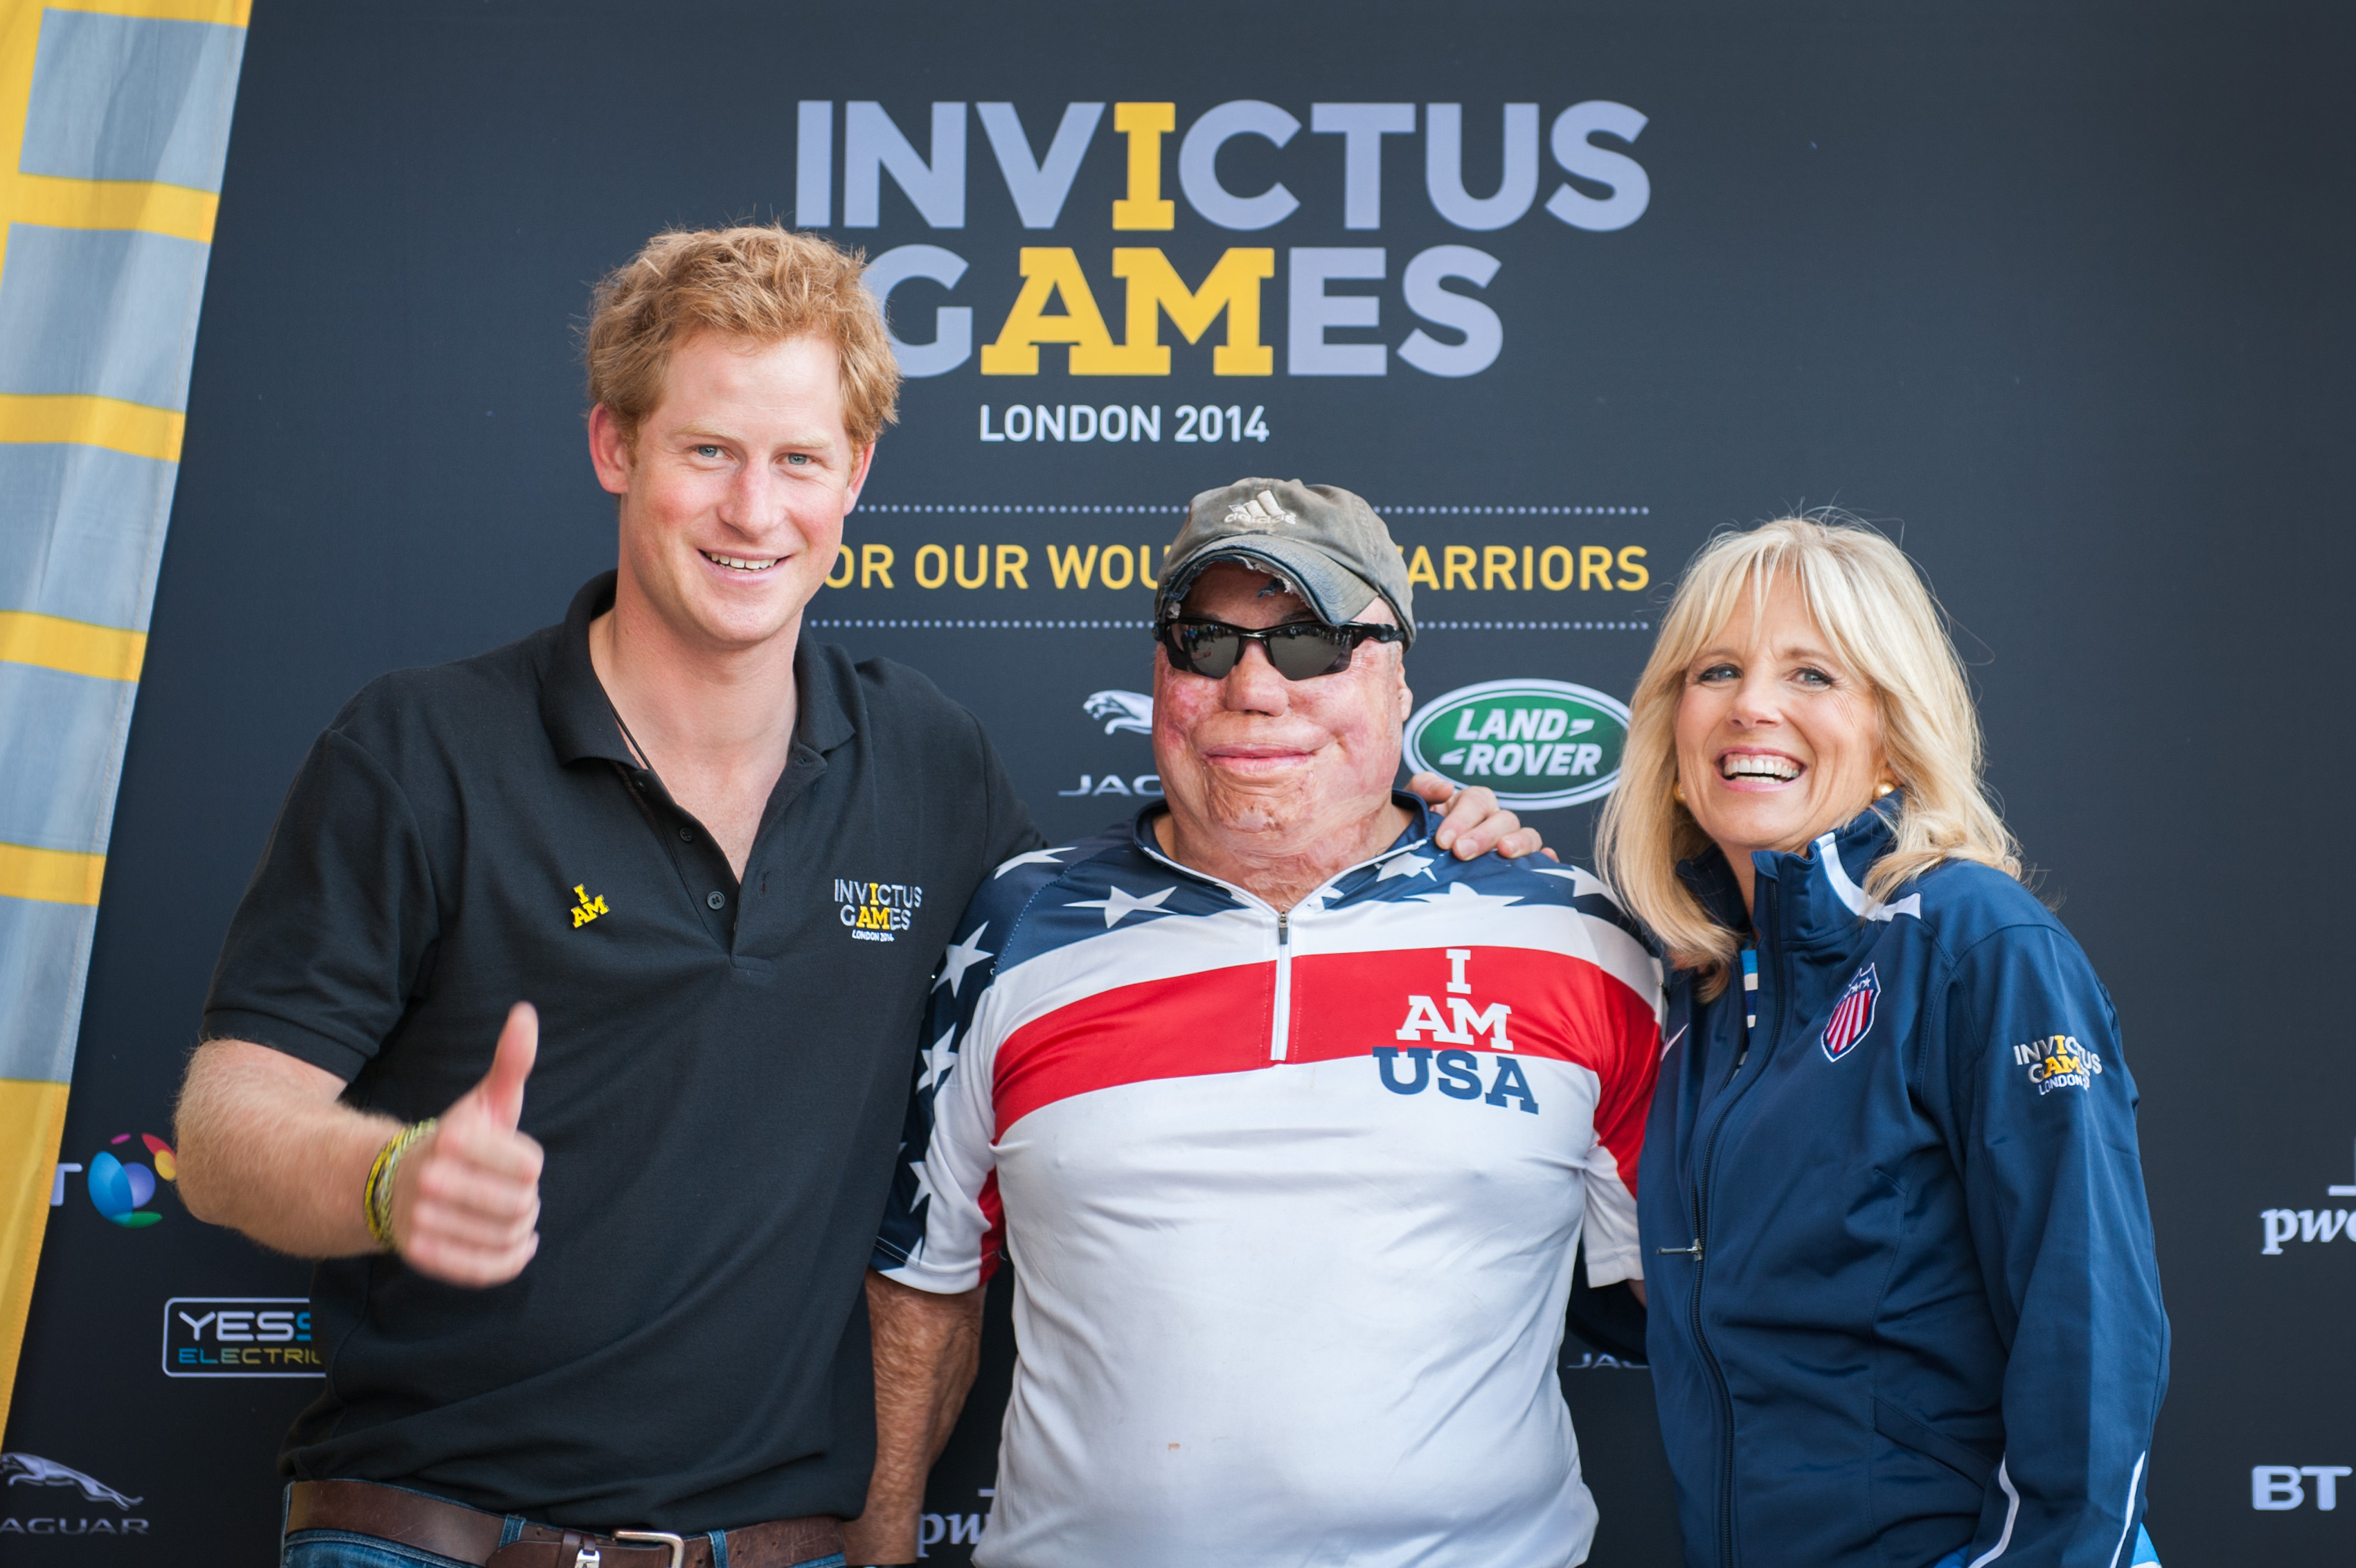 Dr. Jill Biden and Prince Harry congratulate a US Team athlete after a road cycling event at the Invictus Games in London, UK, September 13, 2014. (Photo by James Pan, State Department)